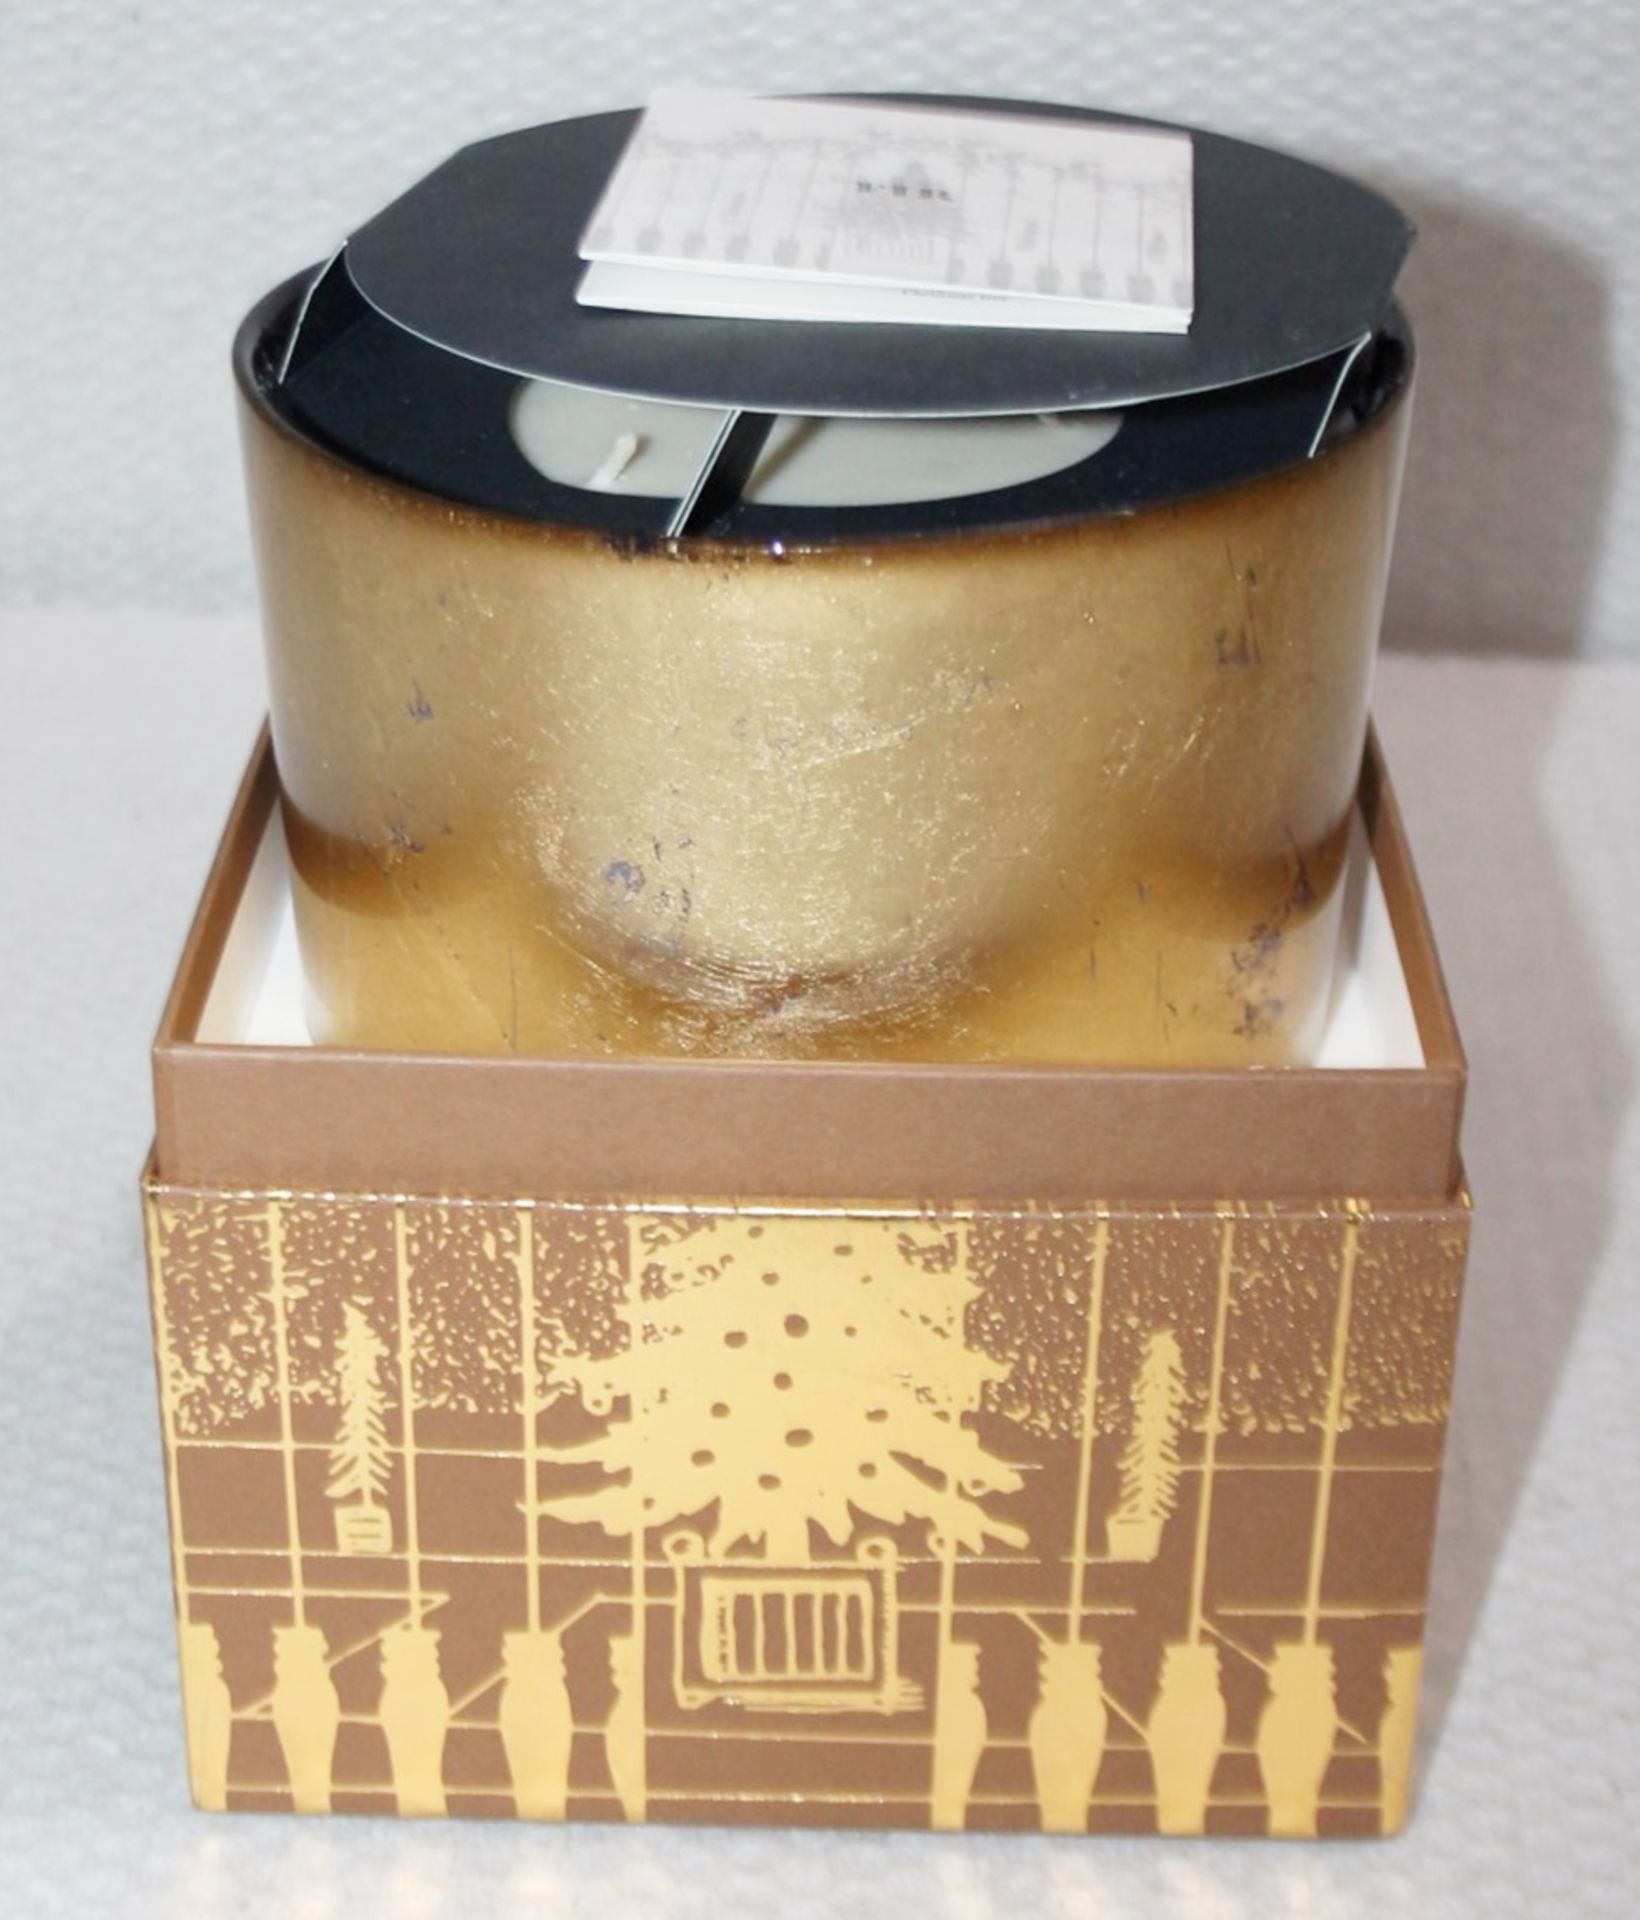 1 x CIRE TRUDON 'Christmas Fir' Great Candle (800g) - Original Price £550.00 - Unused Boxed - Image 5 of 9